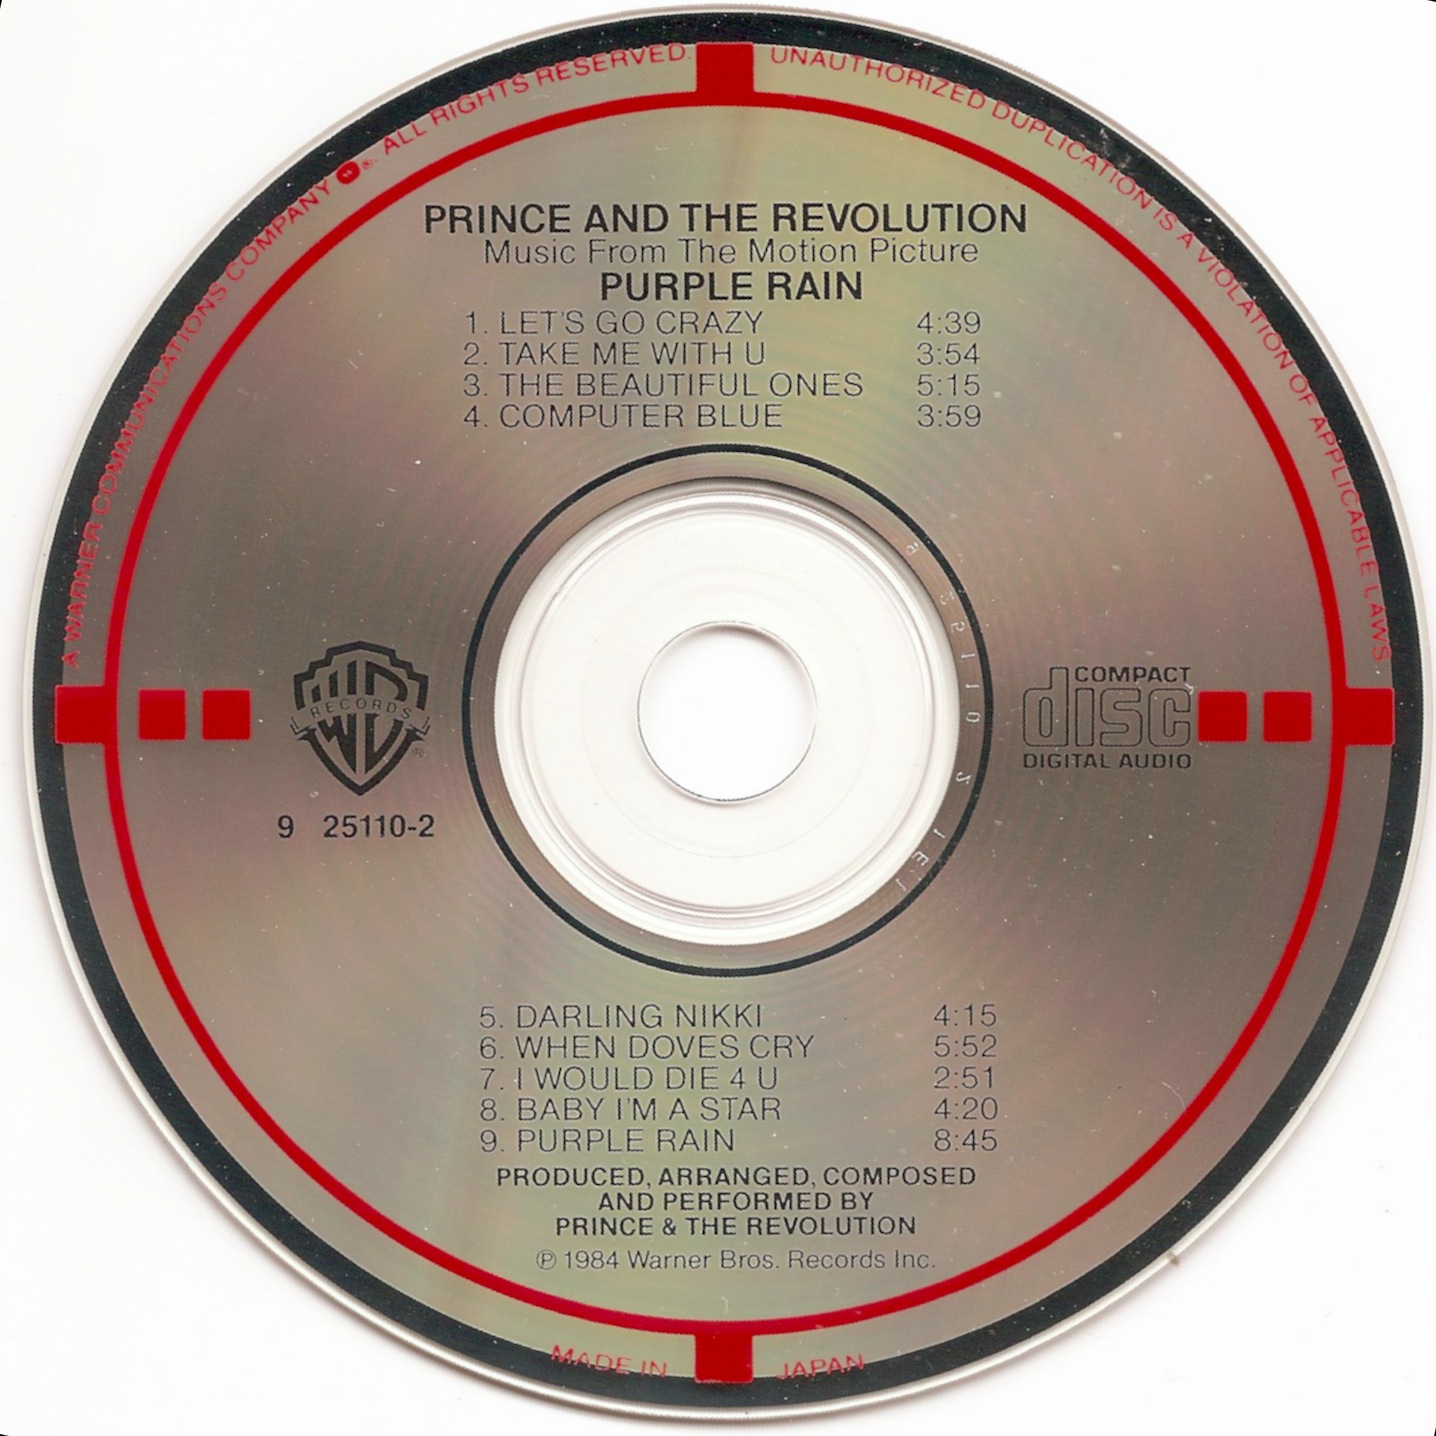 The Target CD Collection: Prince